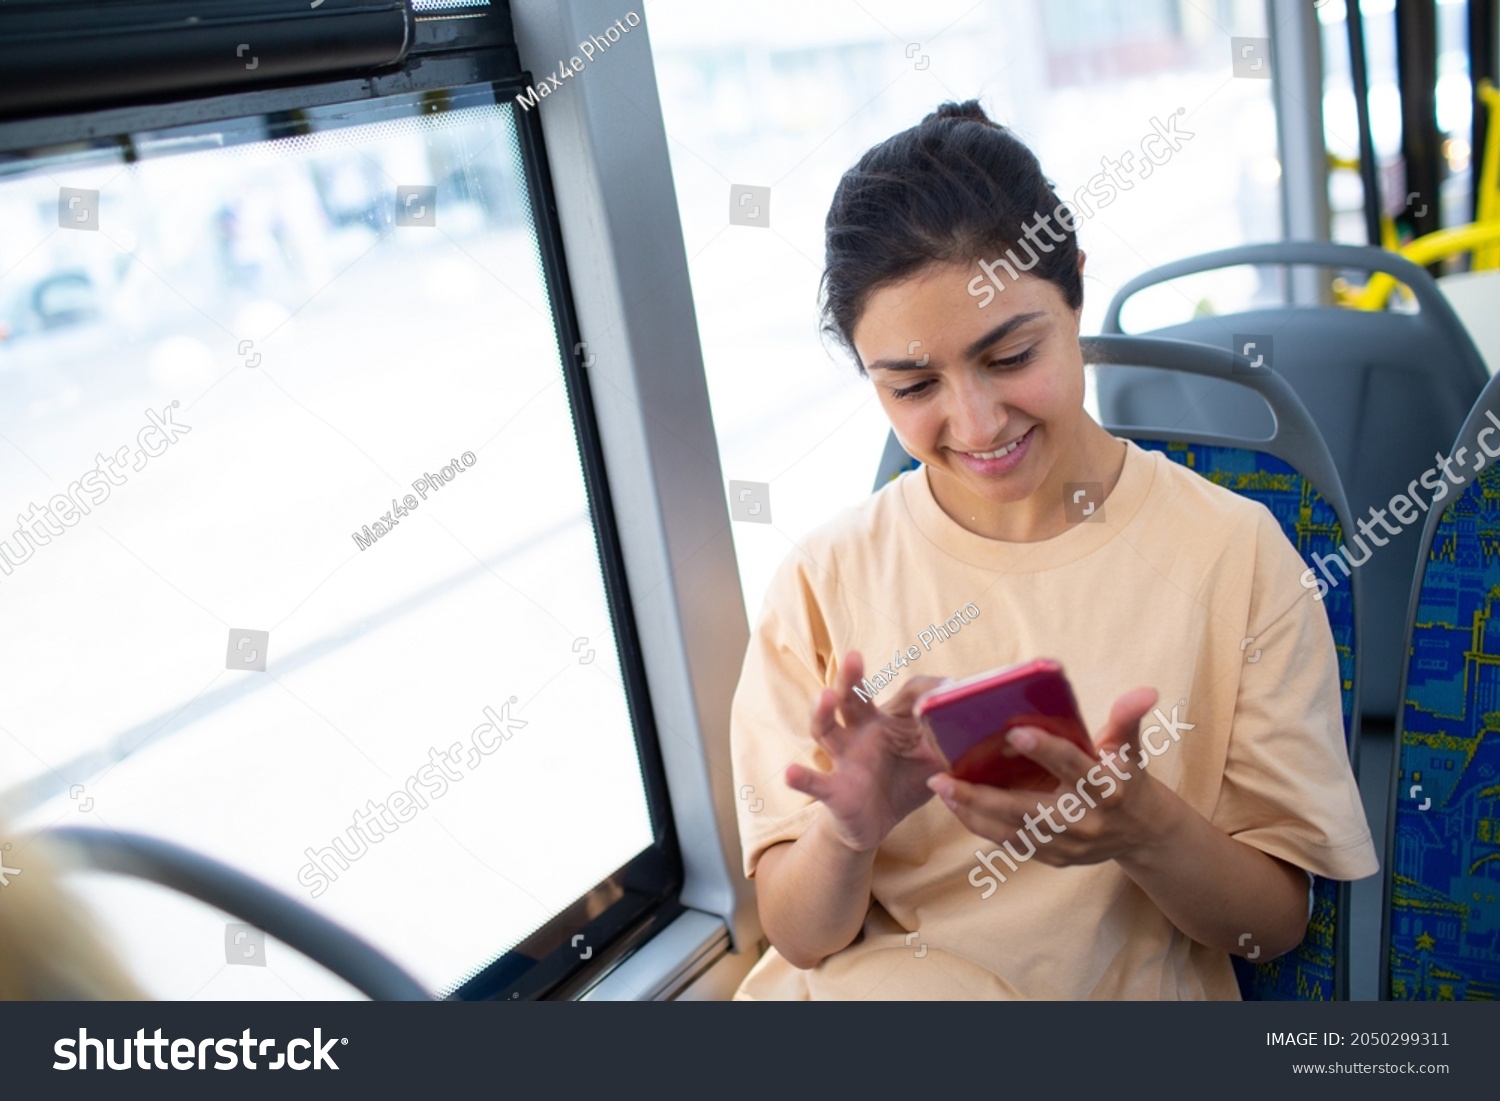 Indian Woman ride in public transport bus or tram with mobile phone #2050299311